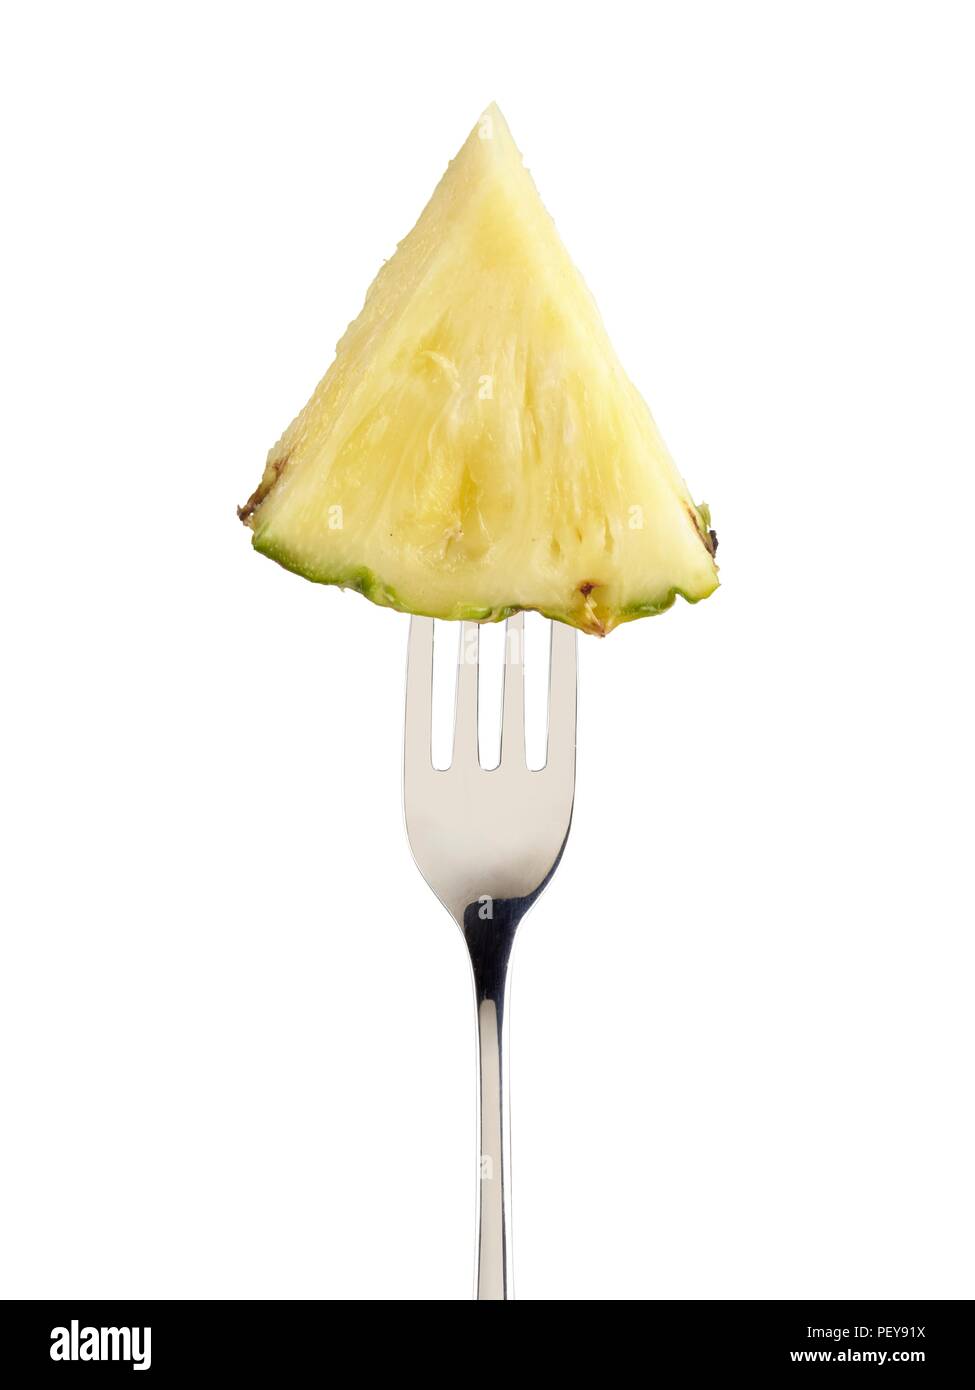 Pineapple slice on a fork. Stock Photo